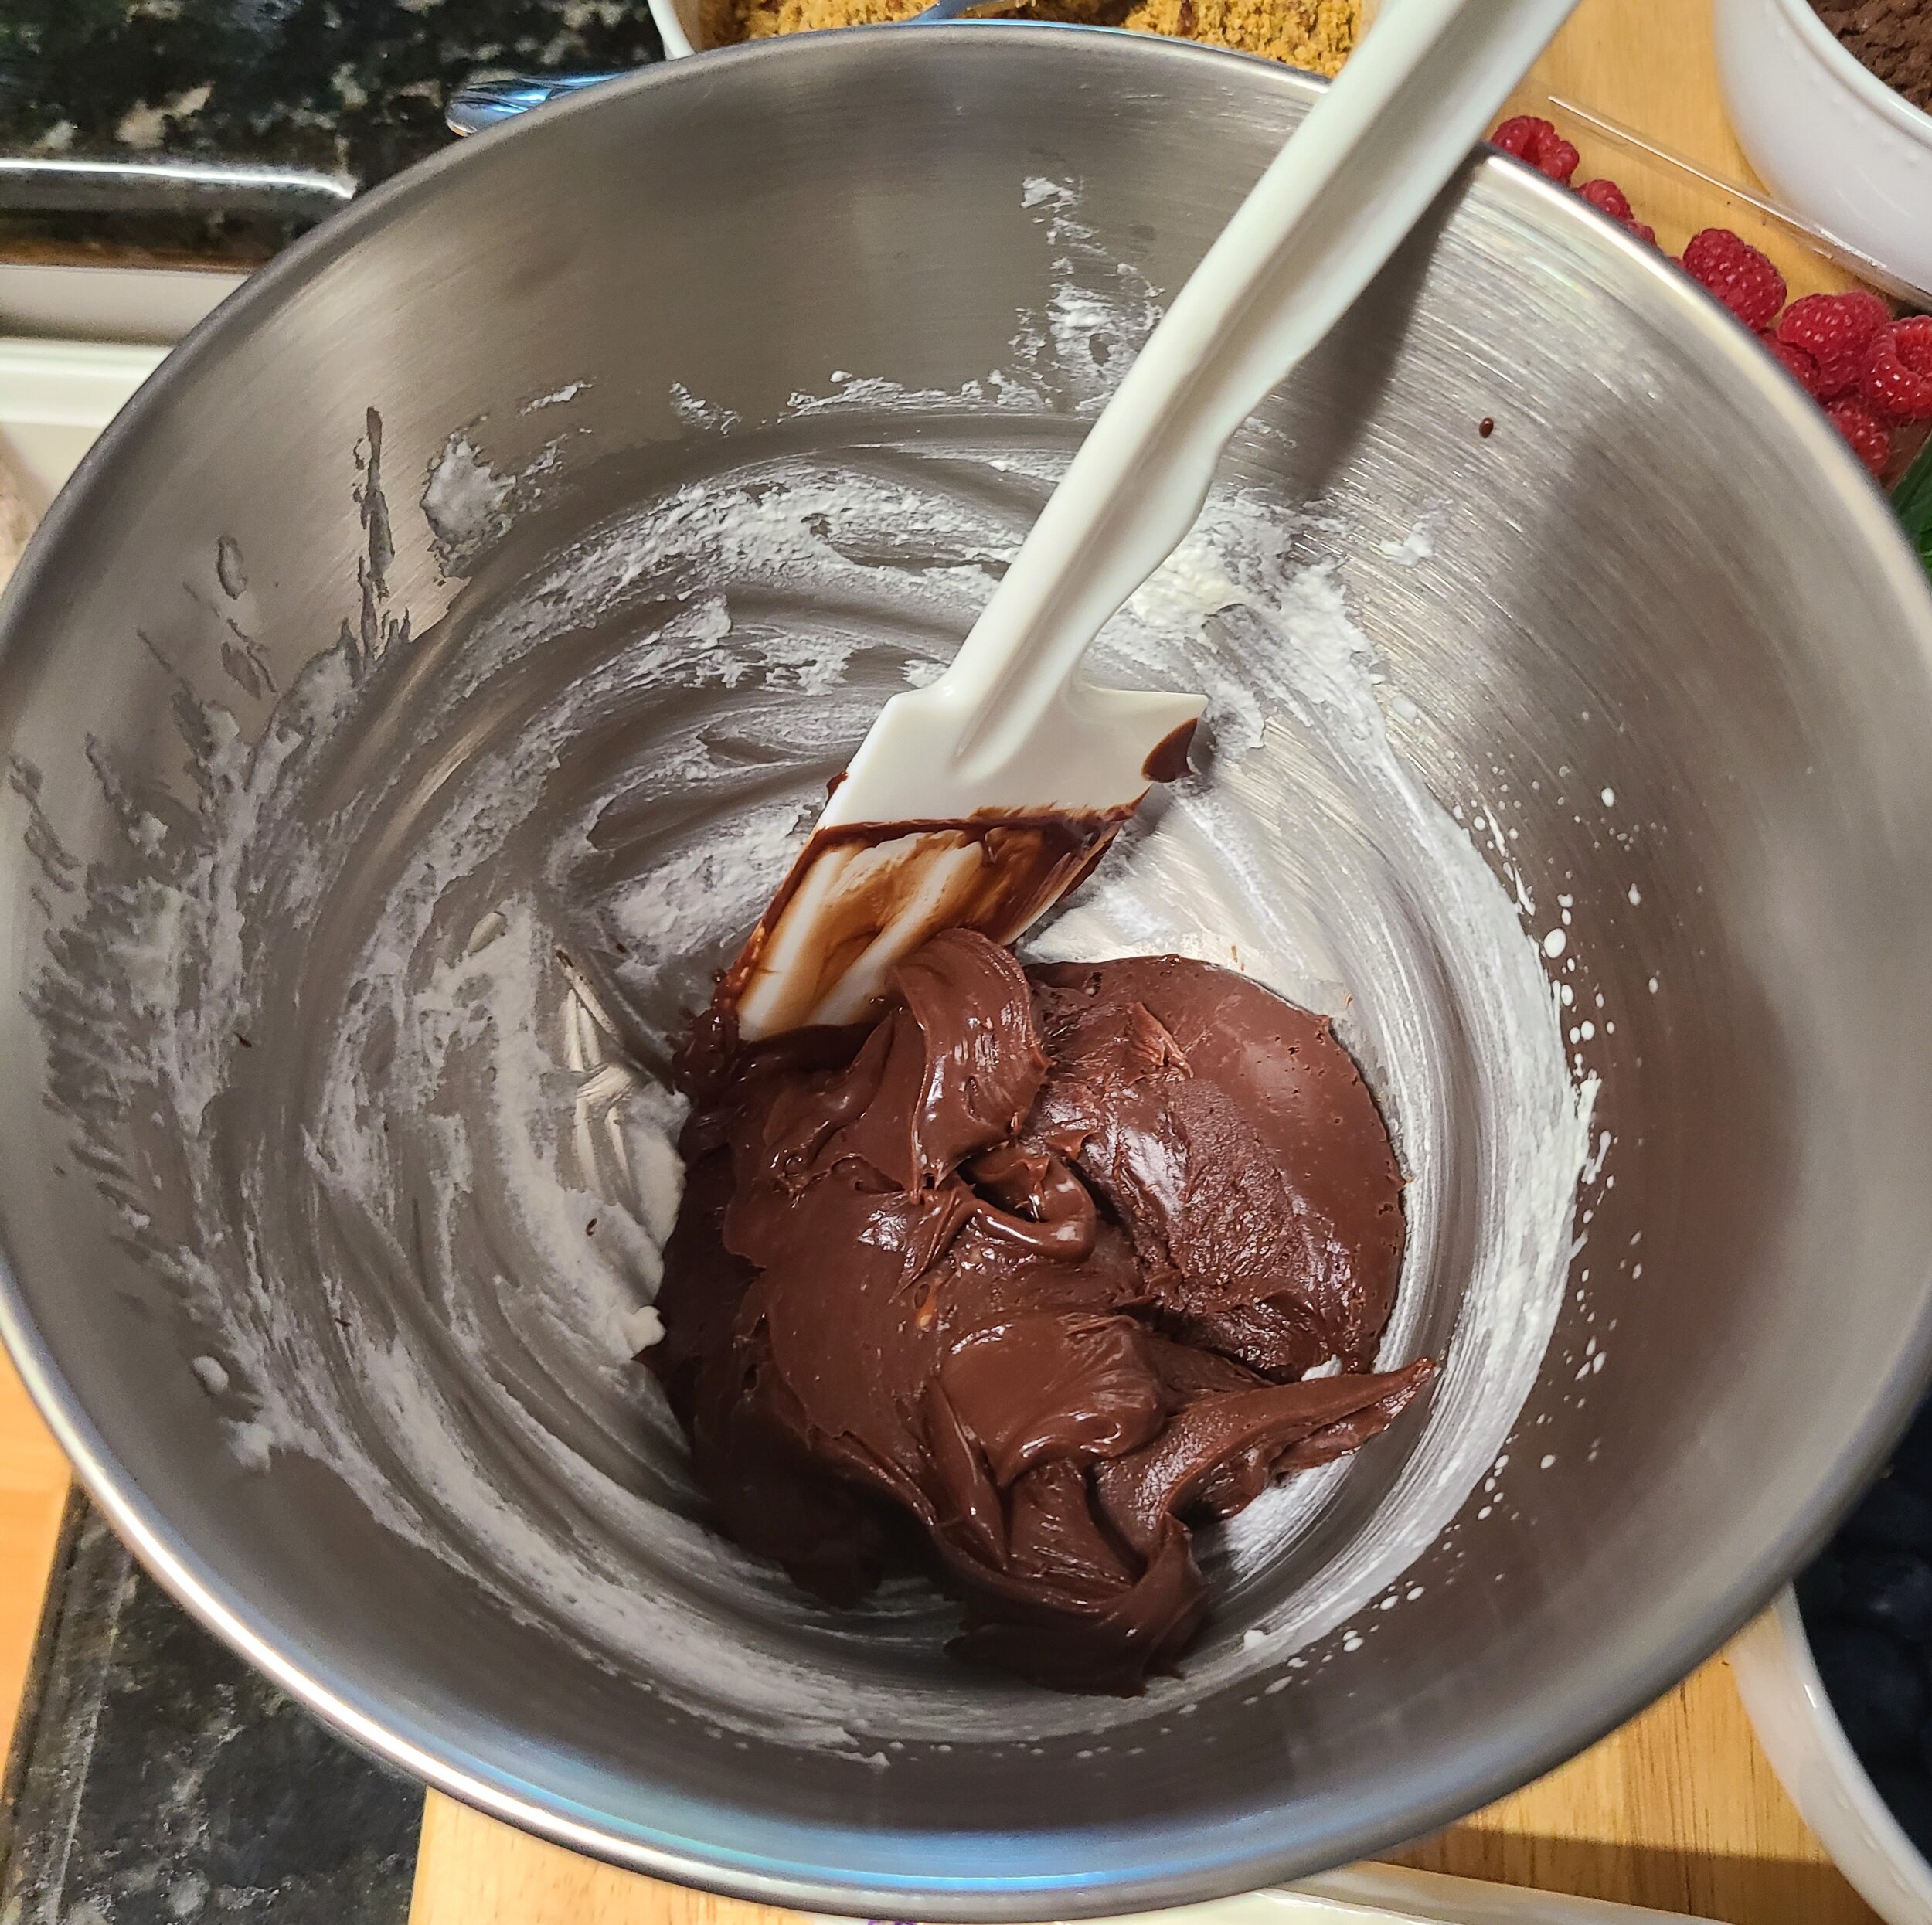 melted chocolate